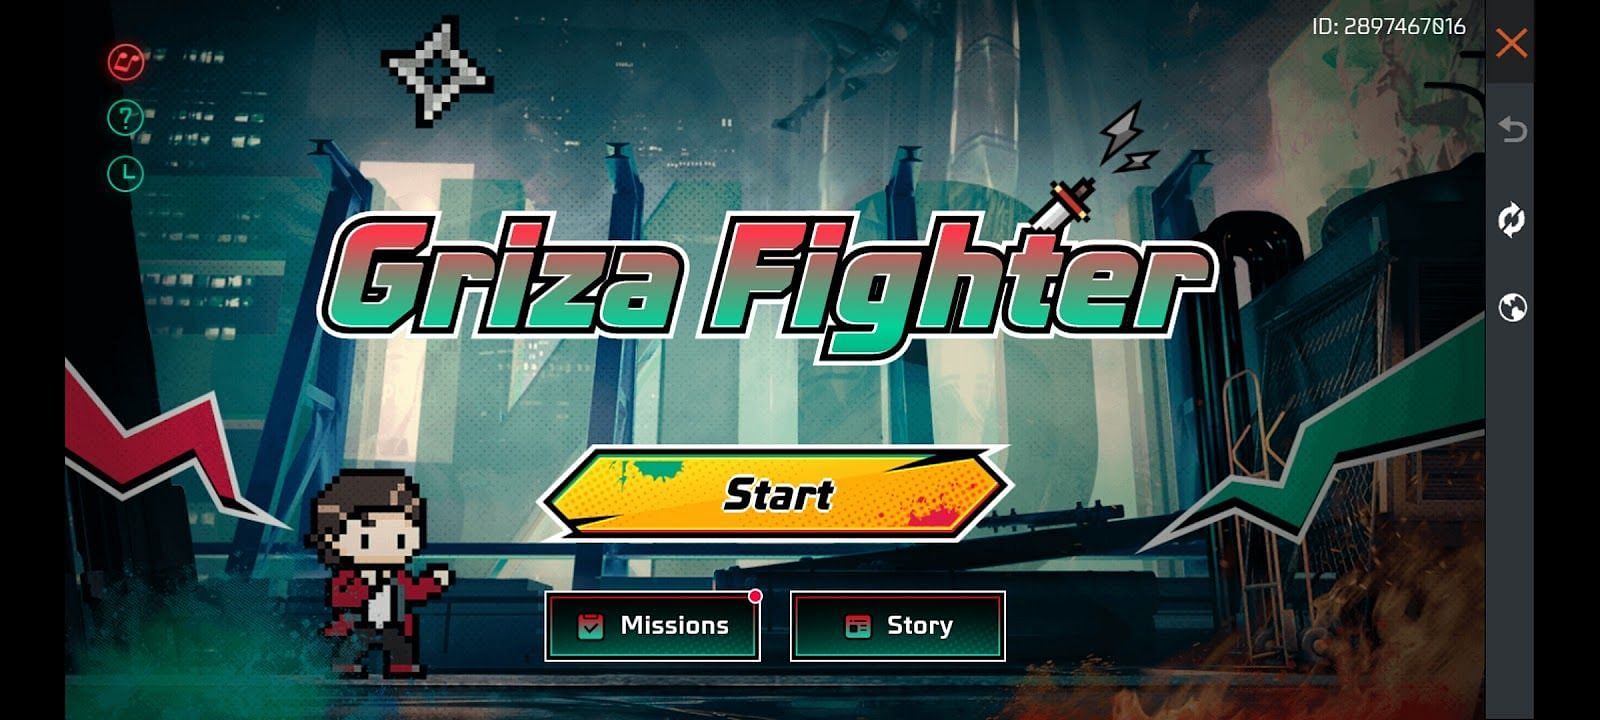 Grab free rewards by playing games in Free Fire MAX&#039;s Griza Fighter (Image via Garena)